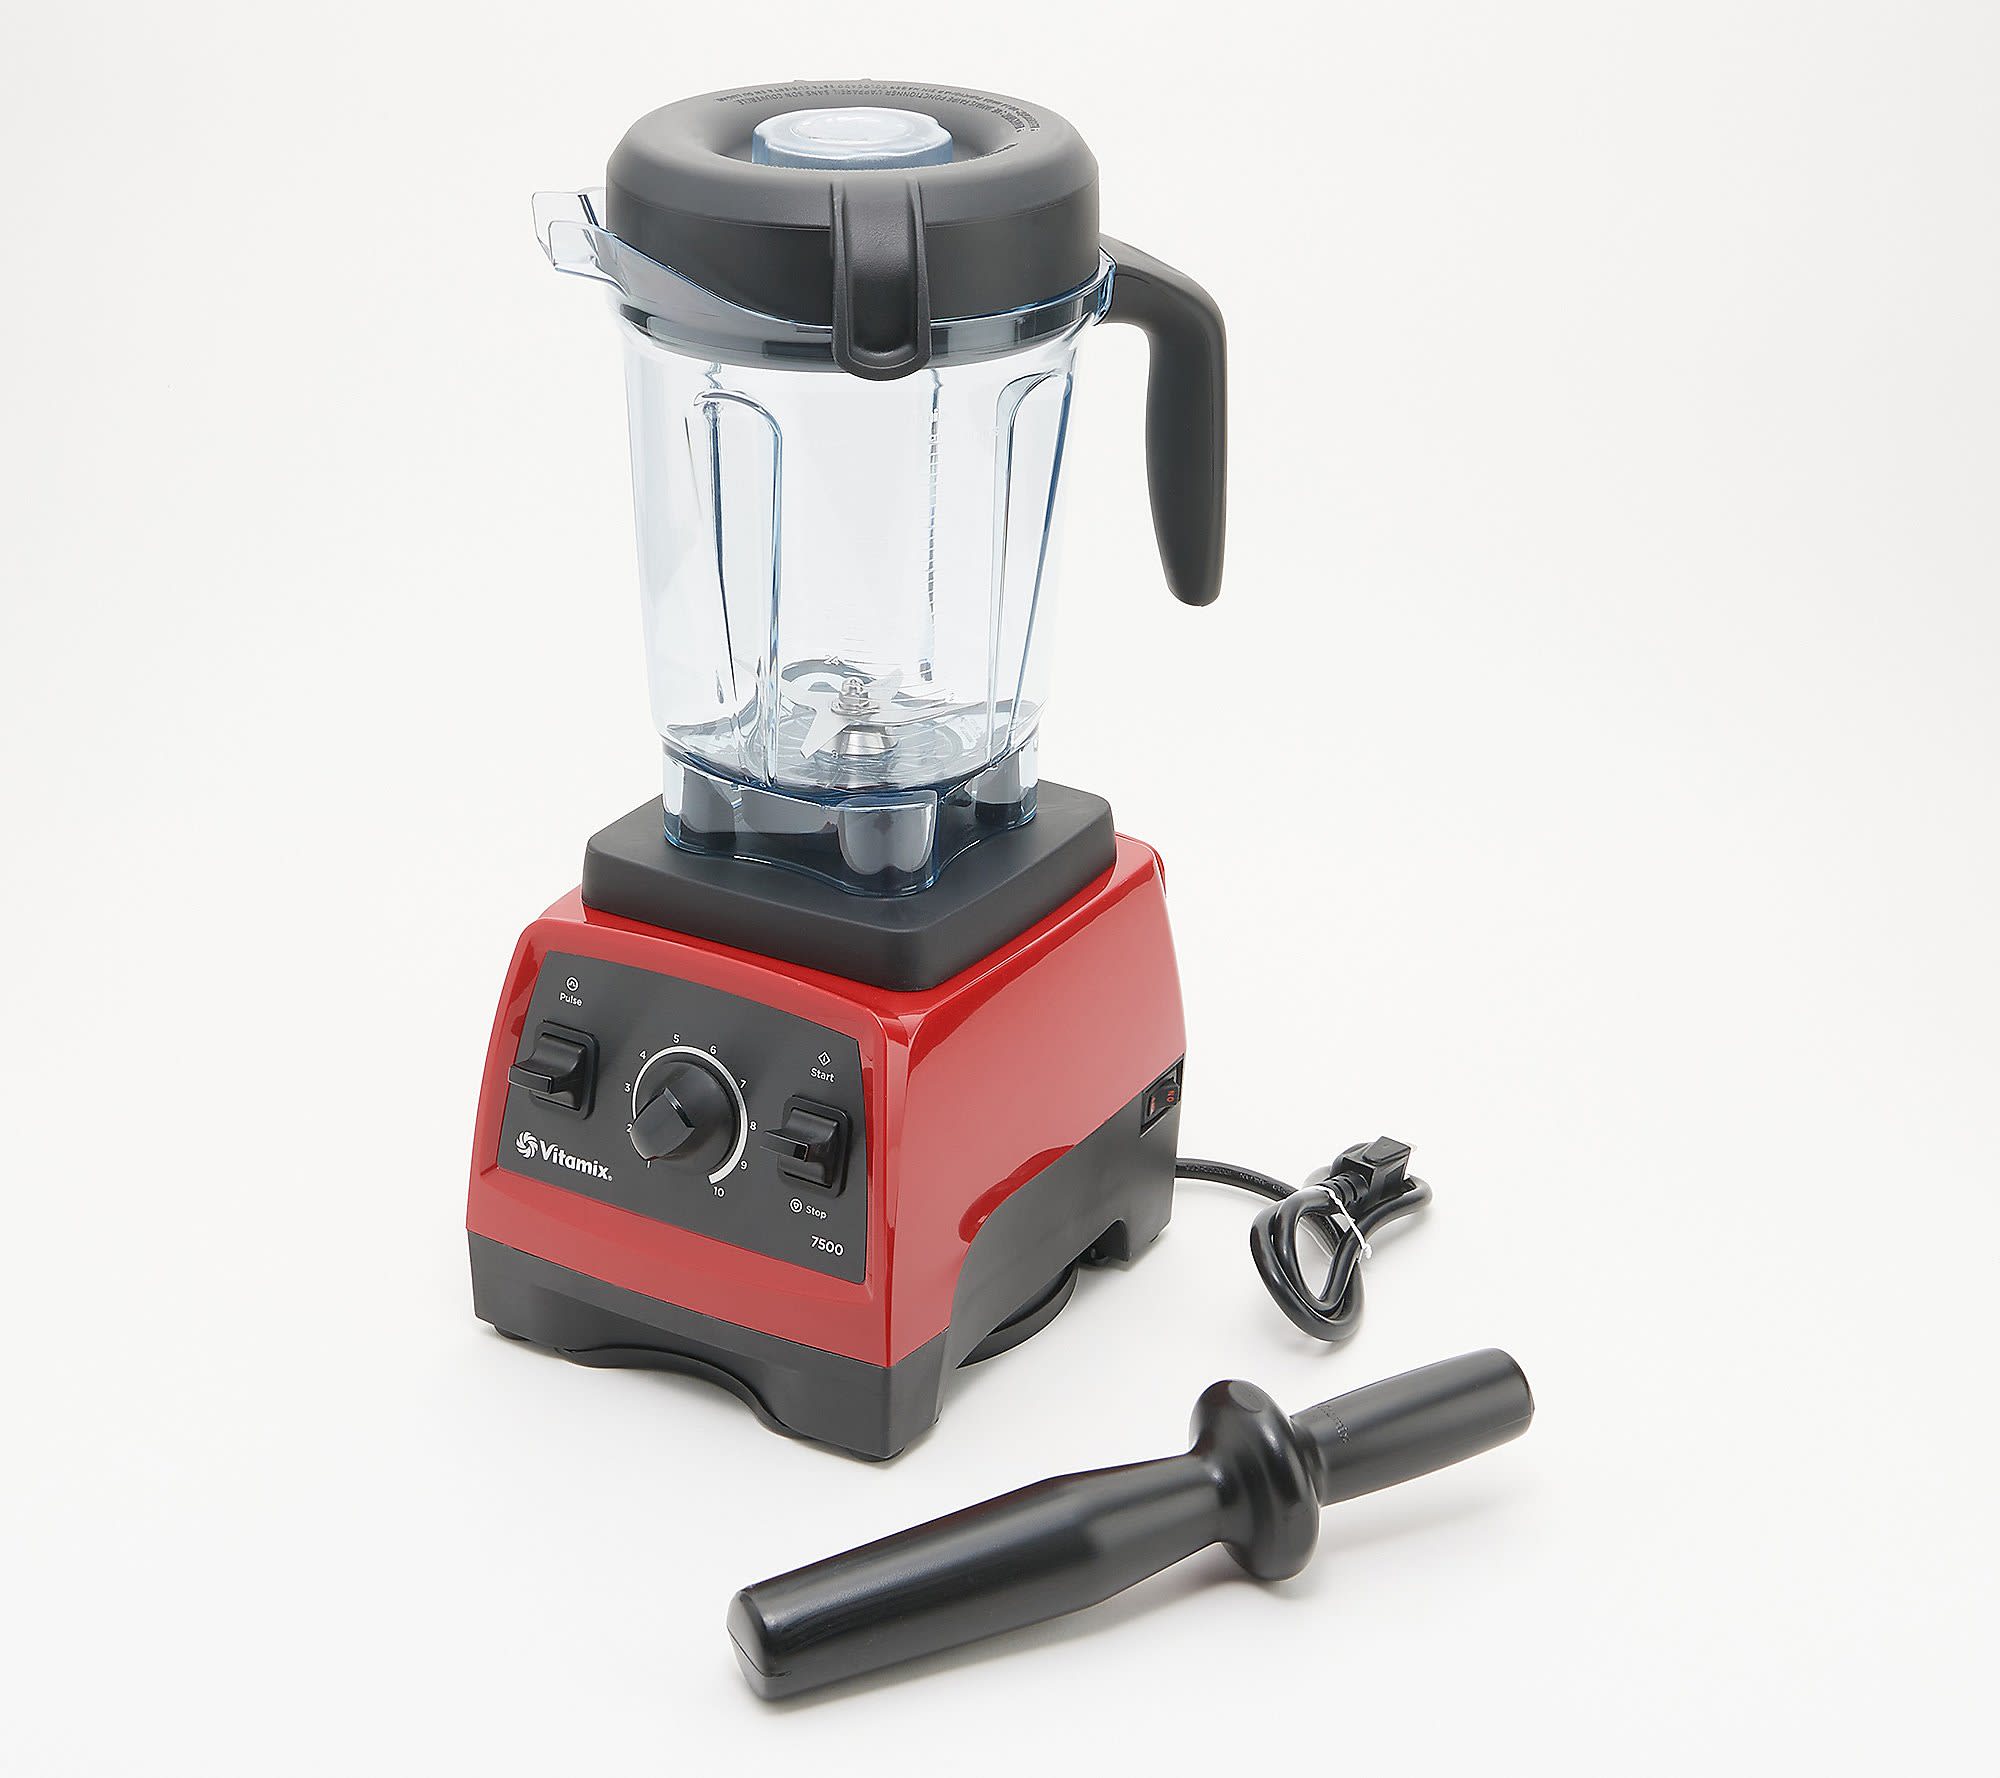 finally has Vitamix blenders on sale again, some for $200